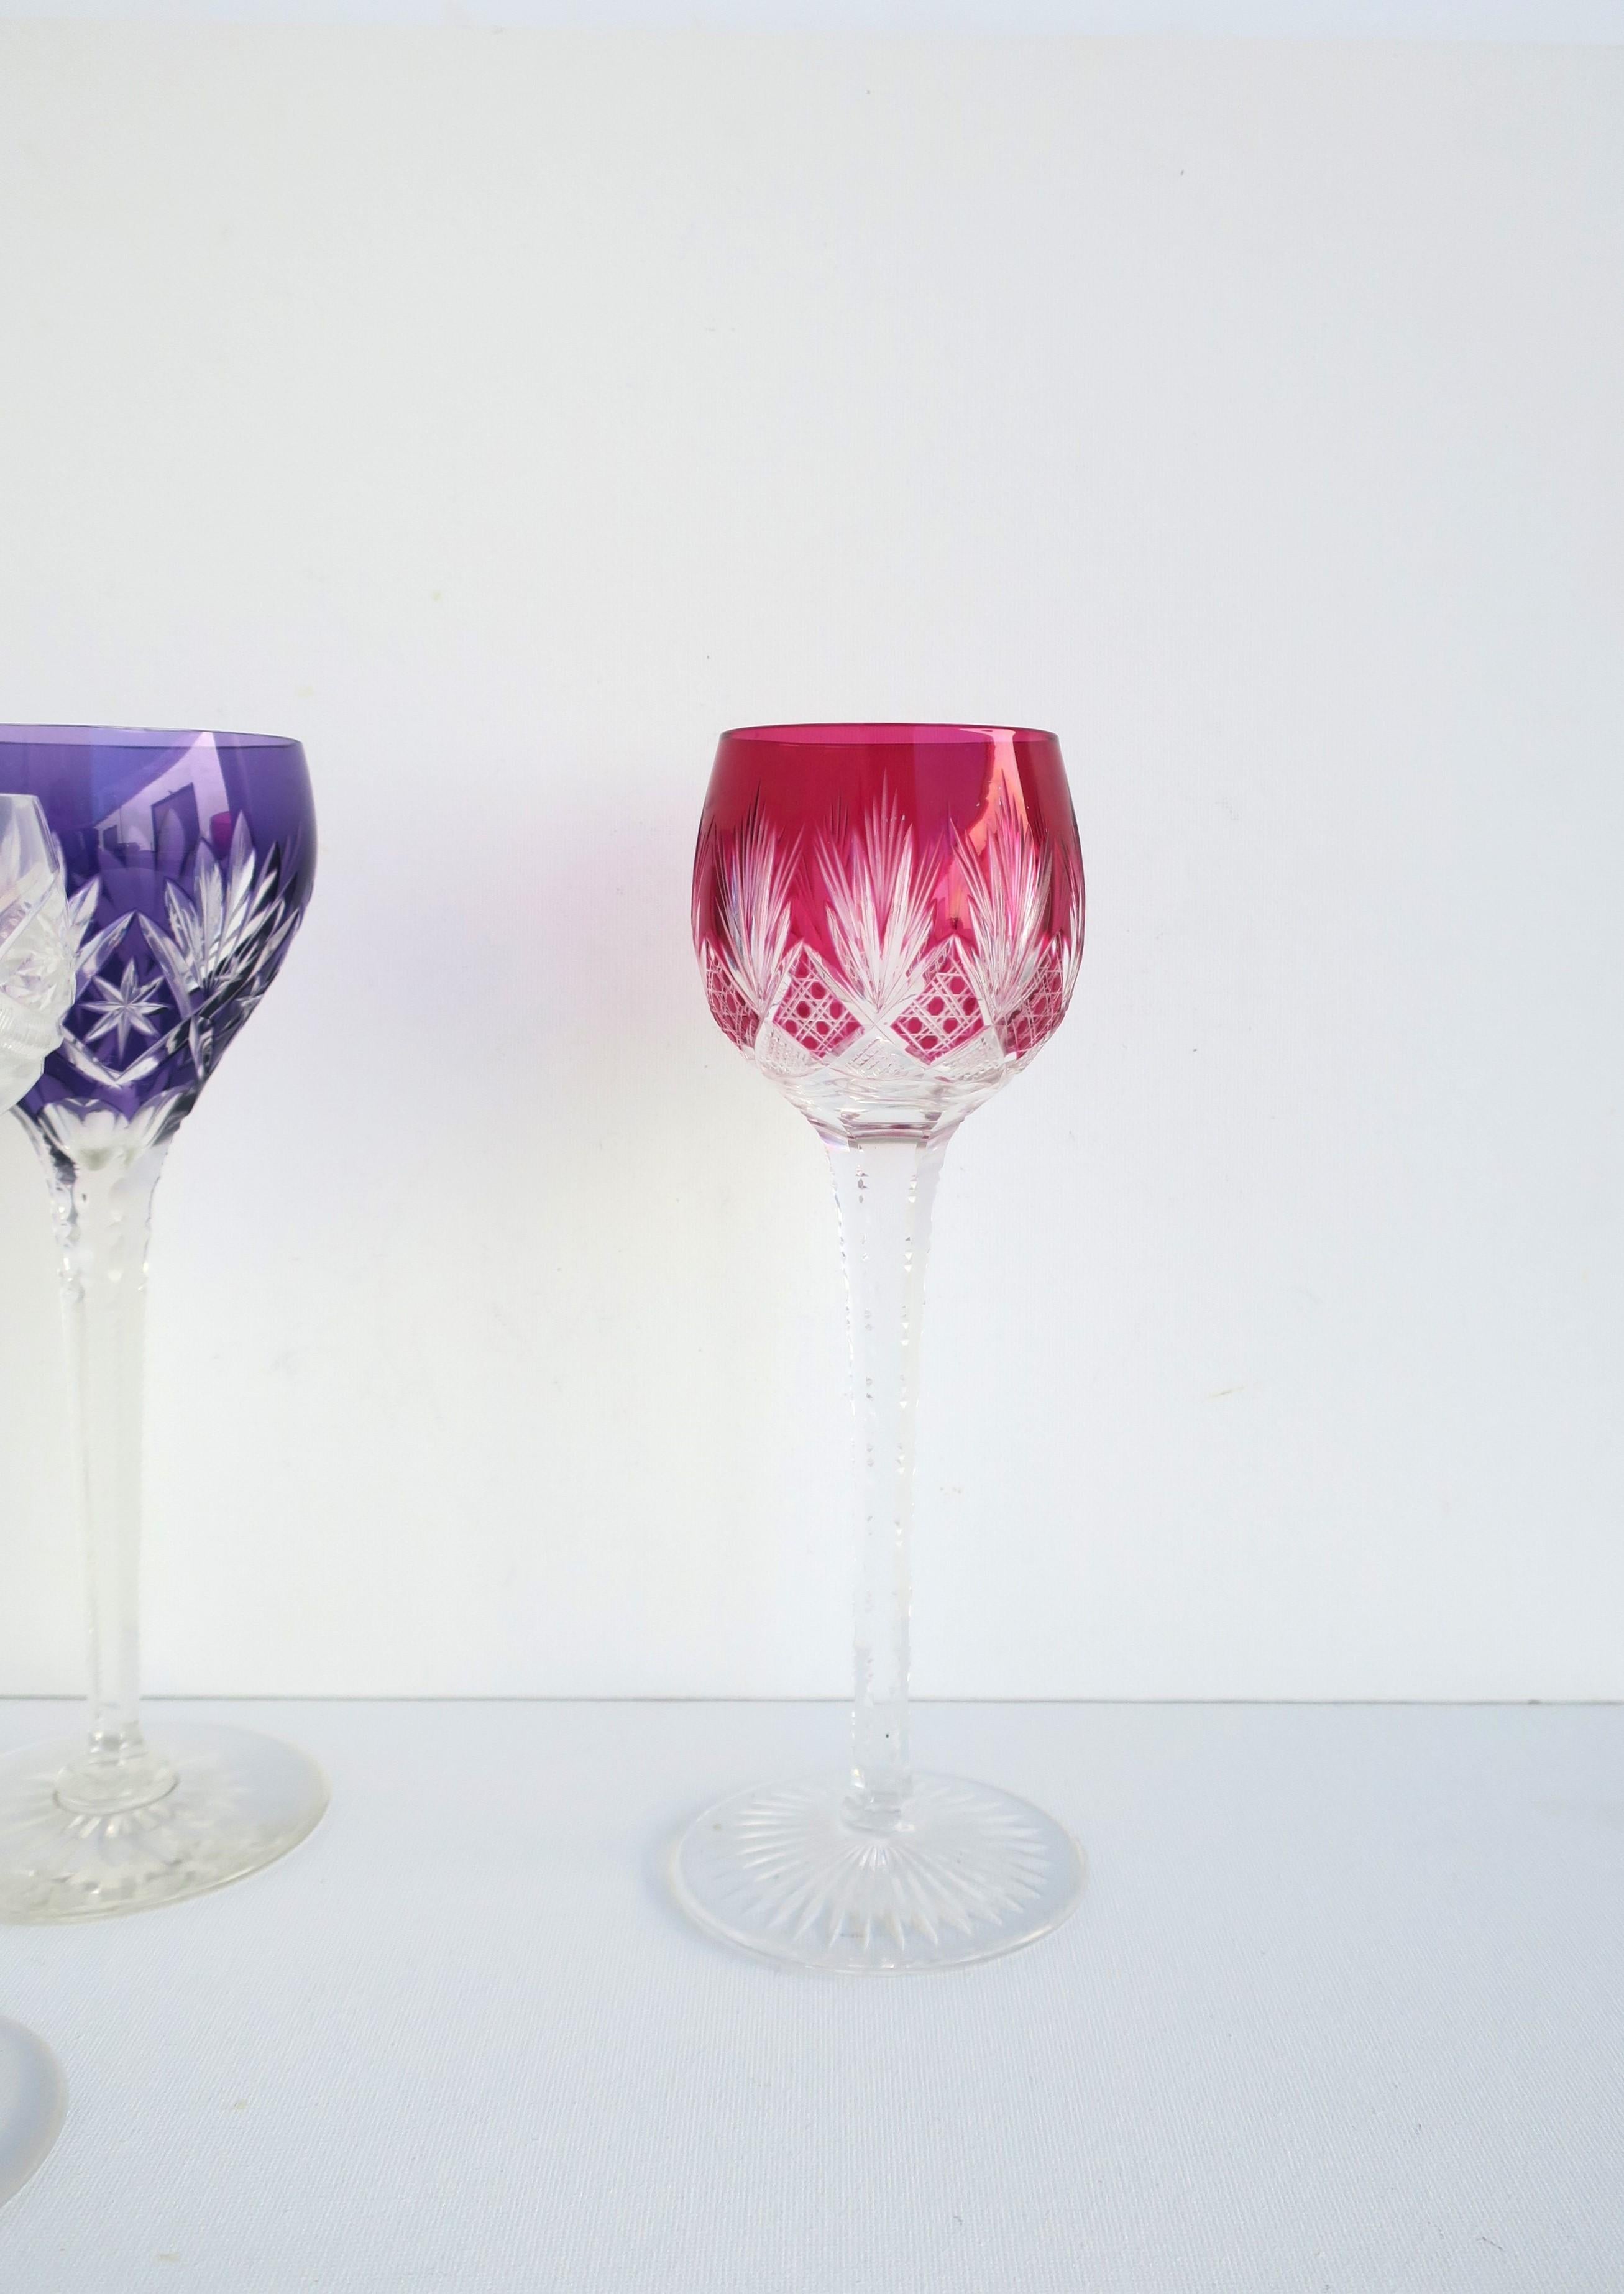 Euro Czech Colorful Cut to Clear Wine or Cocktail Glasses, Set of 3 For Sale 4